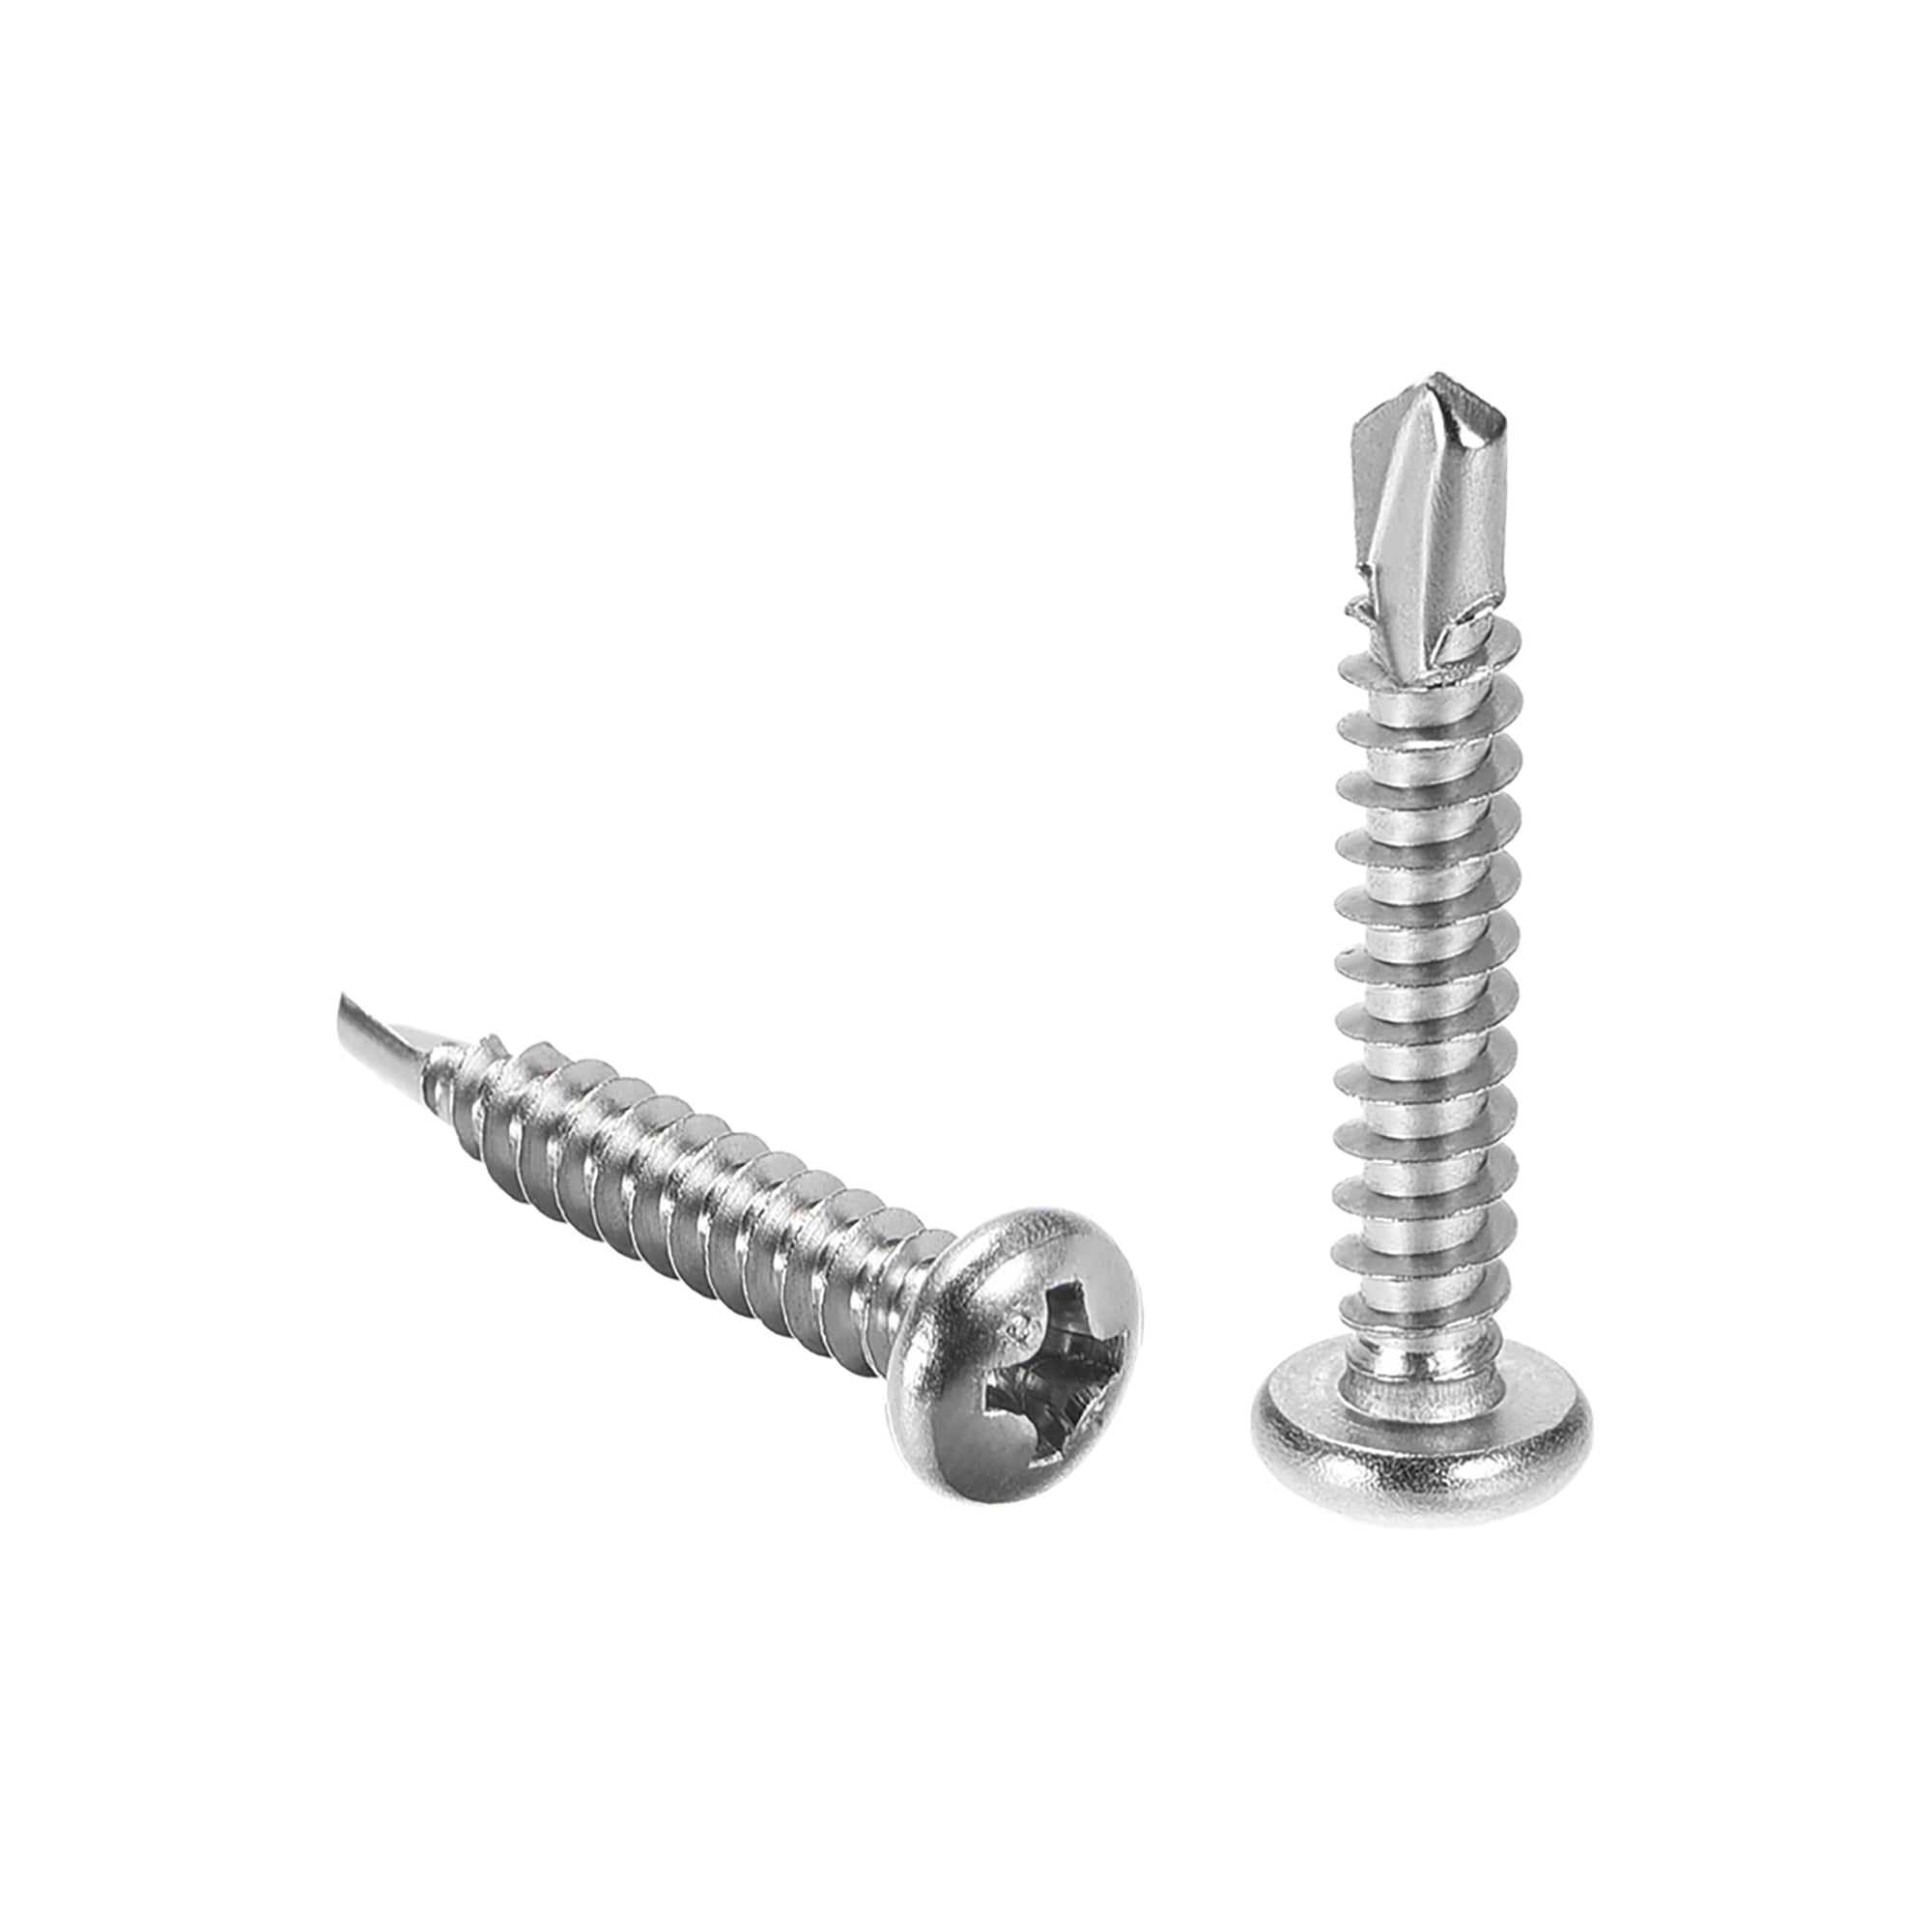 #8 x 1" Self Tapping Screws 410 Stainless Steel Phillips Pan Head Self Stainless Steel Pan Head Self Drilling Screws